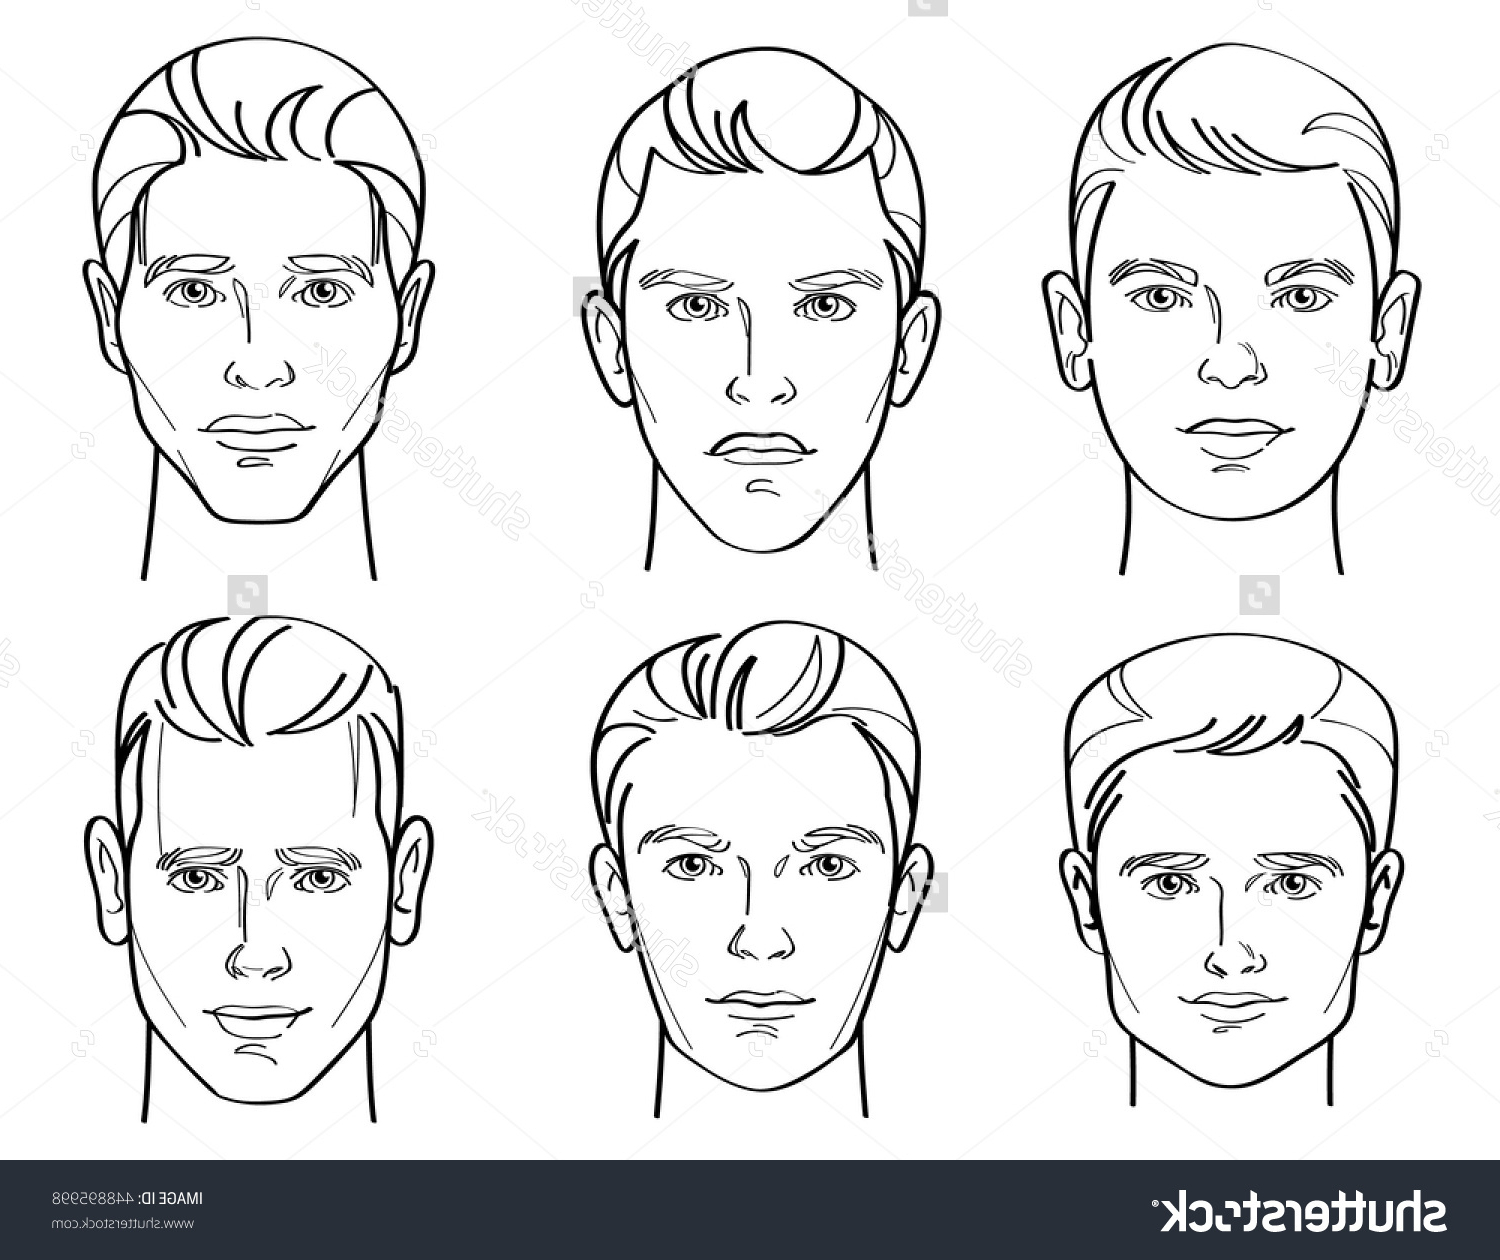 Face Shape Drawing How to draw a hand based on geometric shapes. face shape drawing